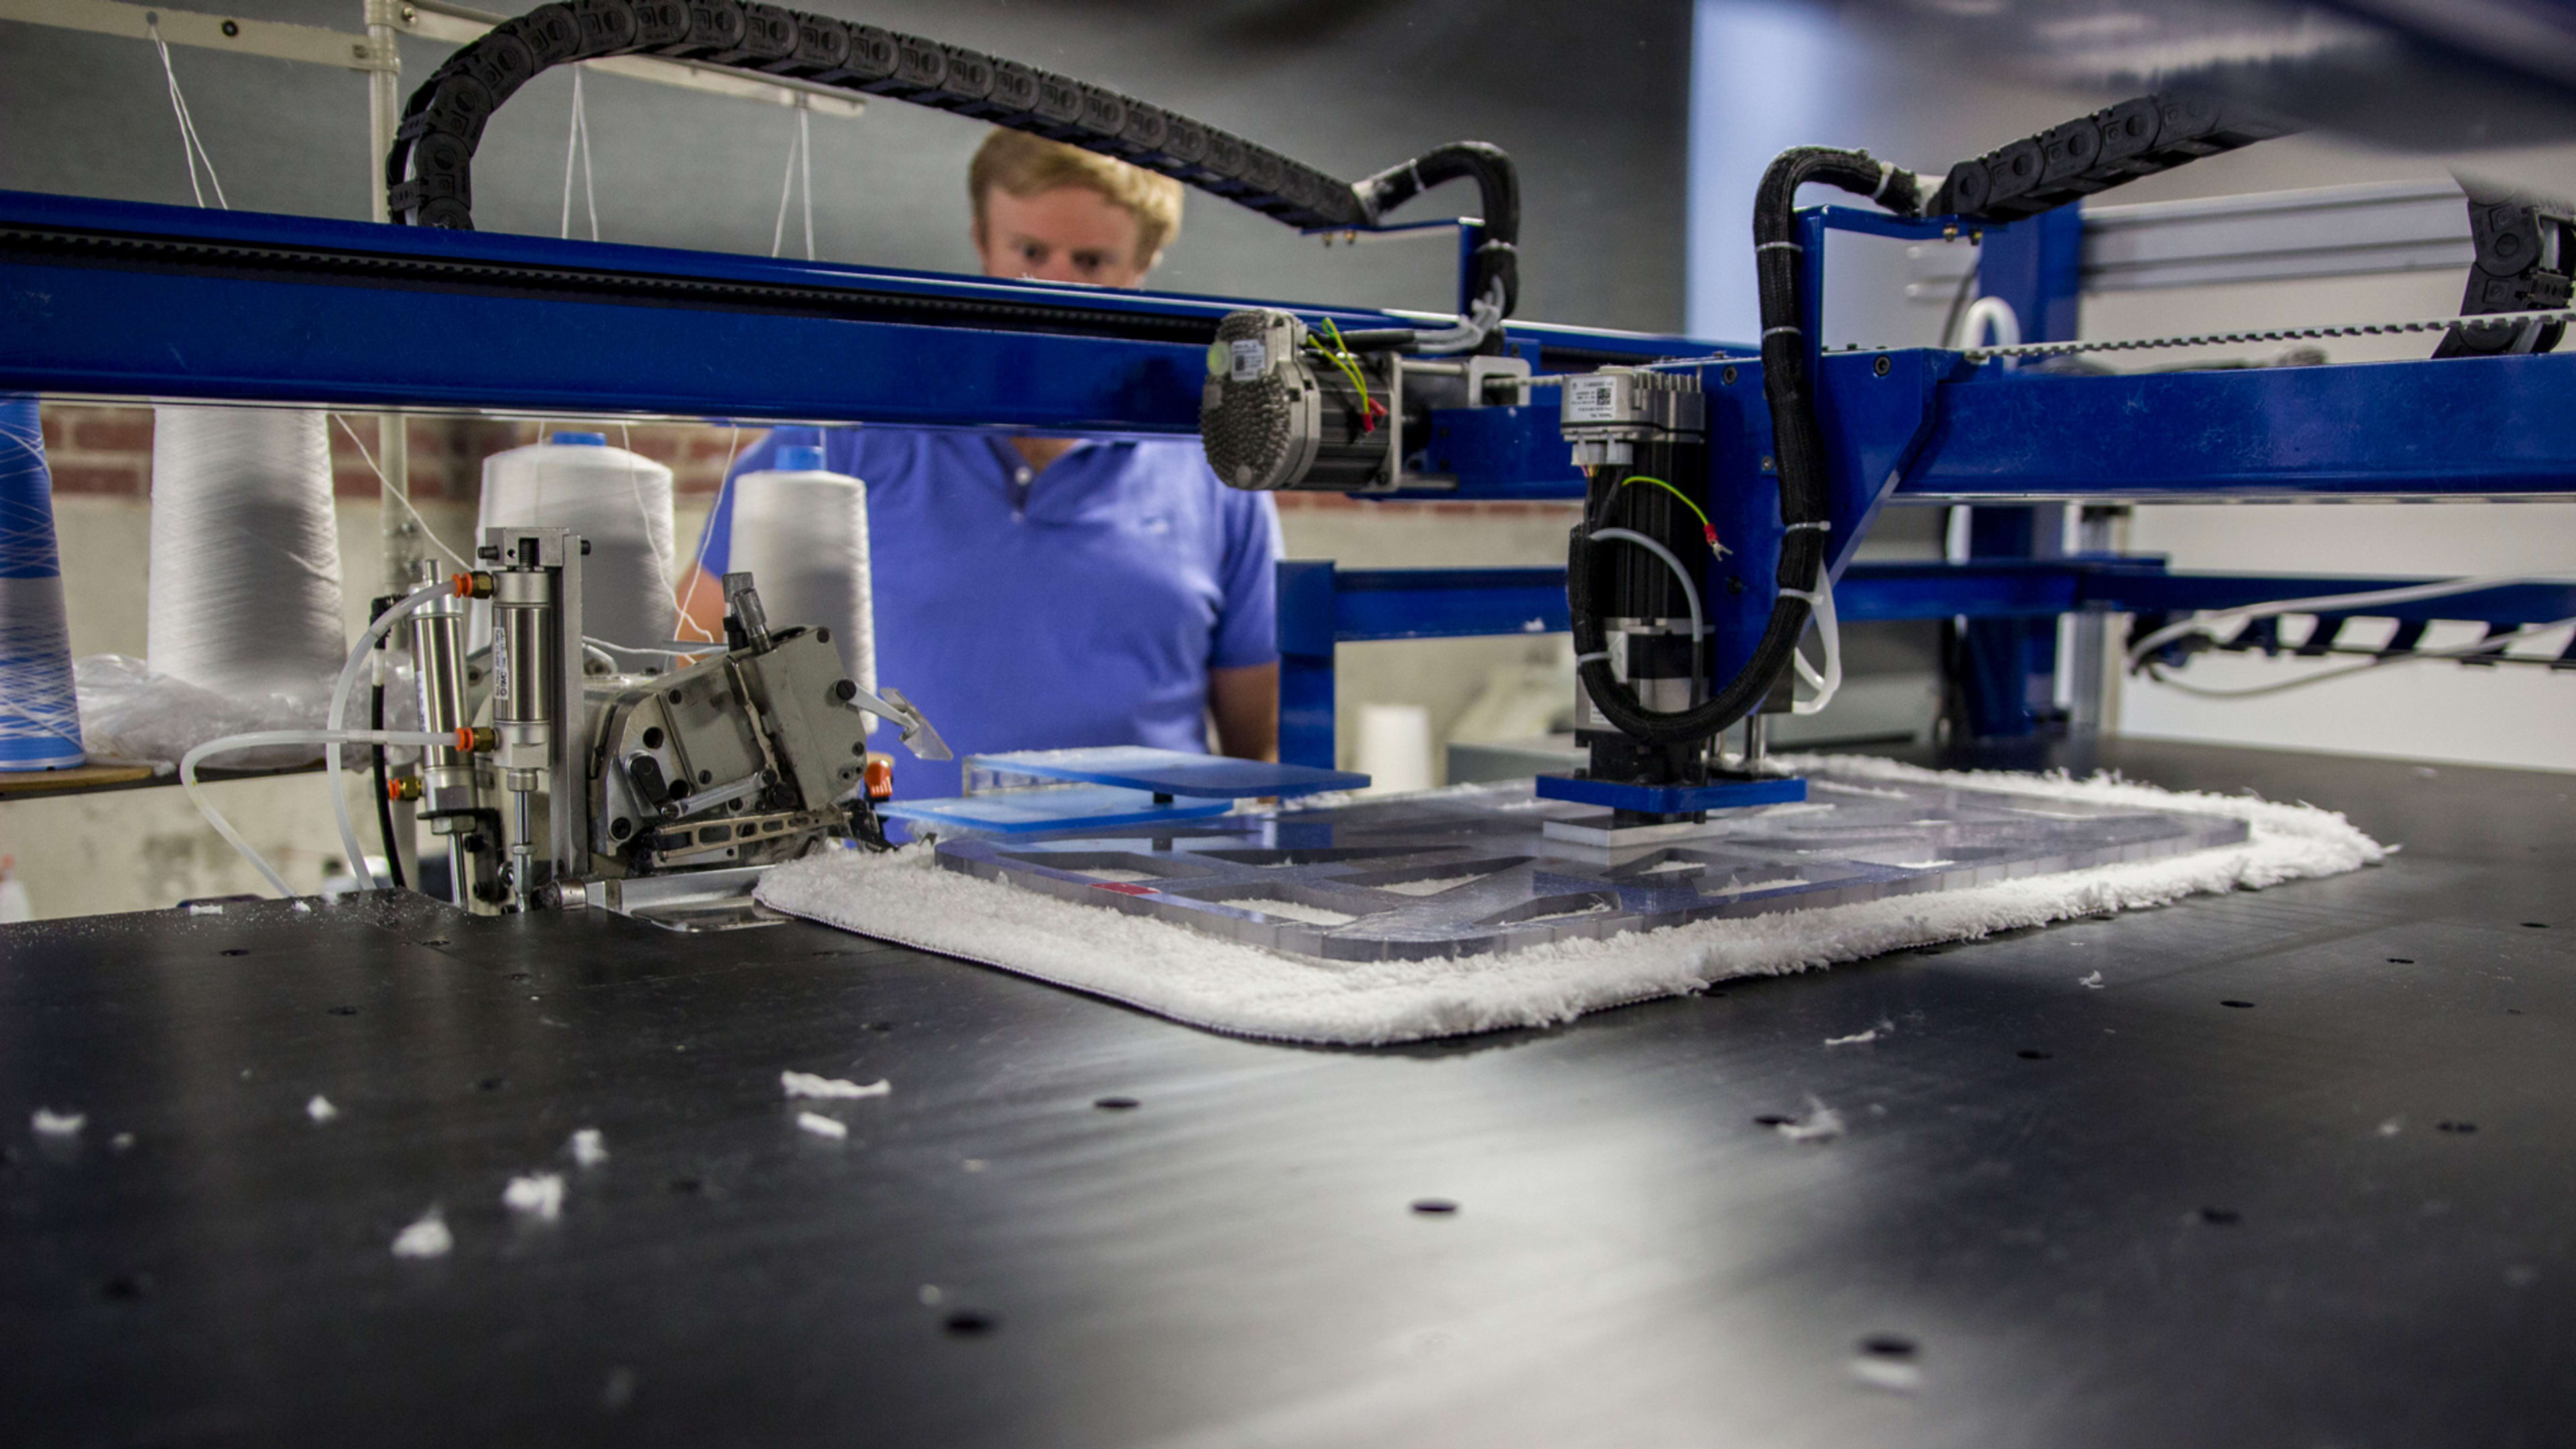 This T-Shirt Sewing Robot Could Radically Shift The Apparel Industry